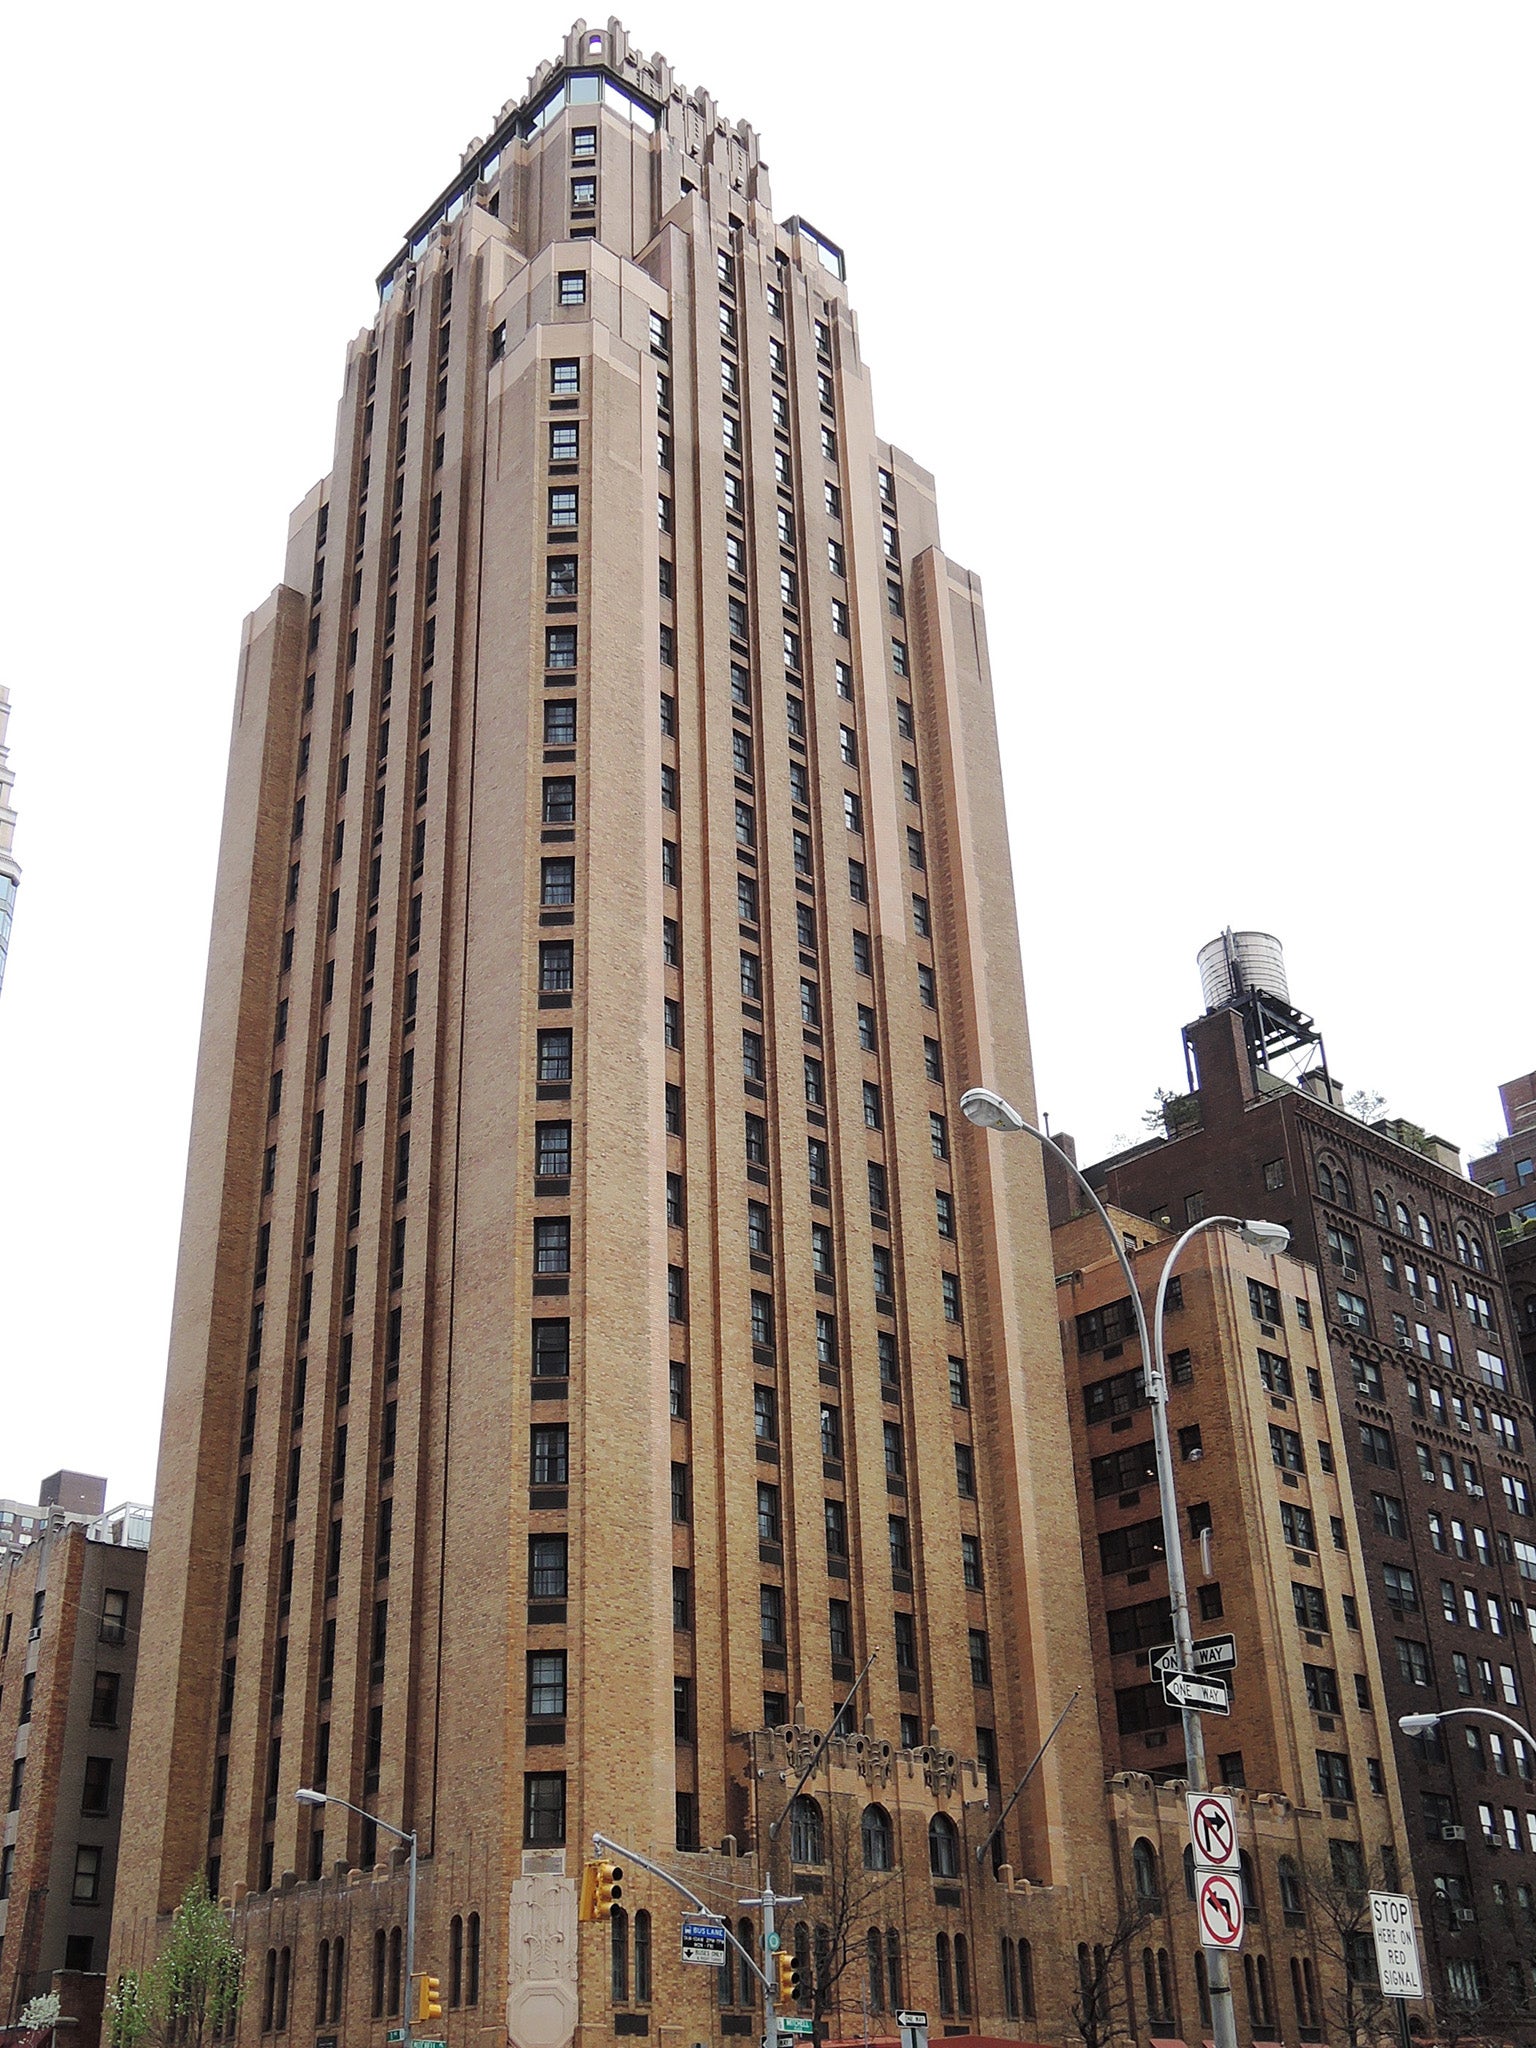 &#13;
&#13;
Until 1934, only women could live in the Panhellenic, now known as Beekman Tower &#13;